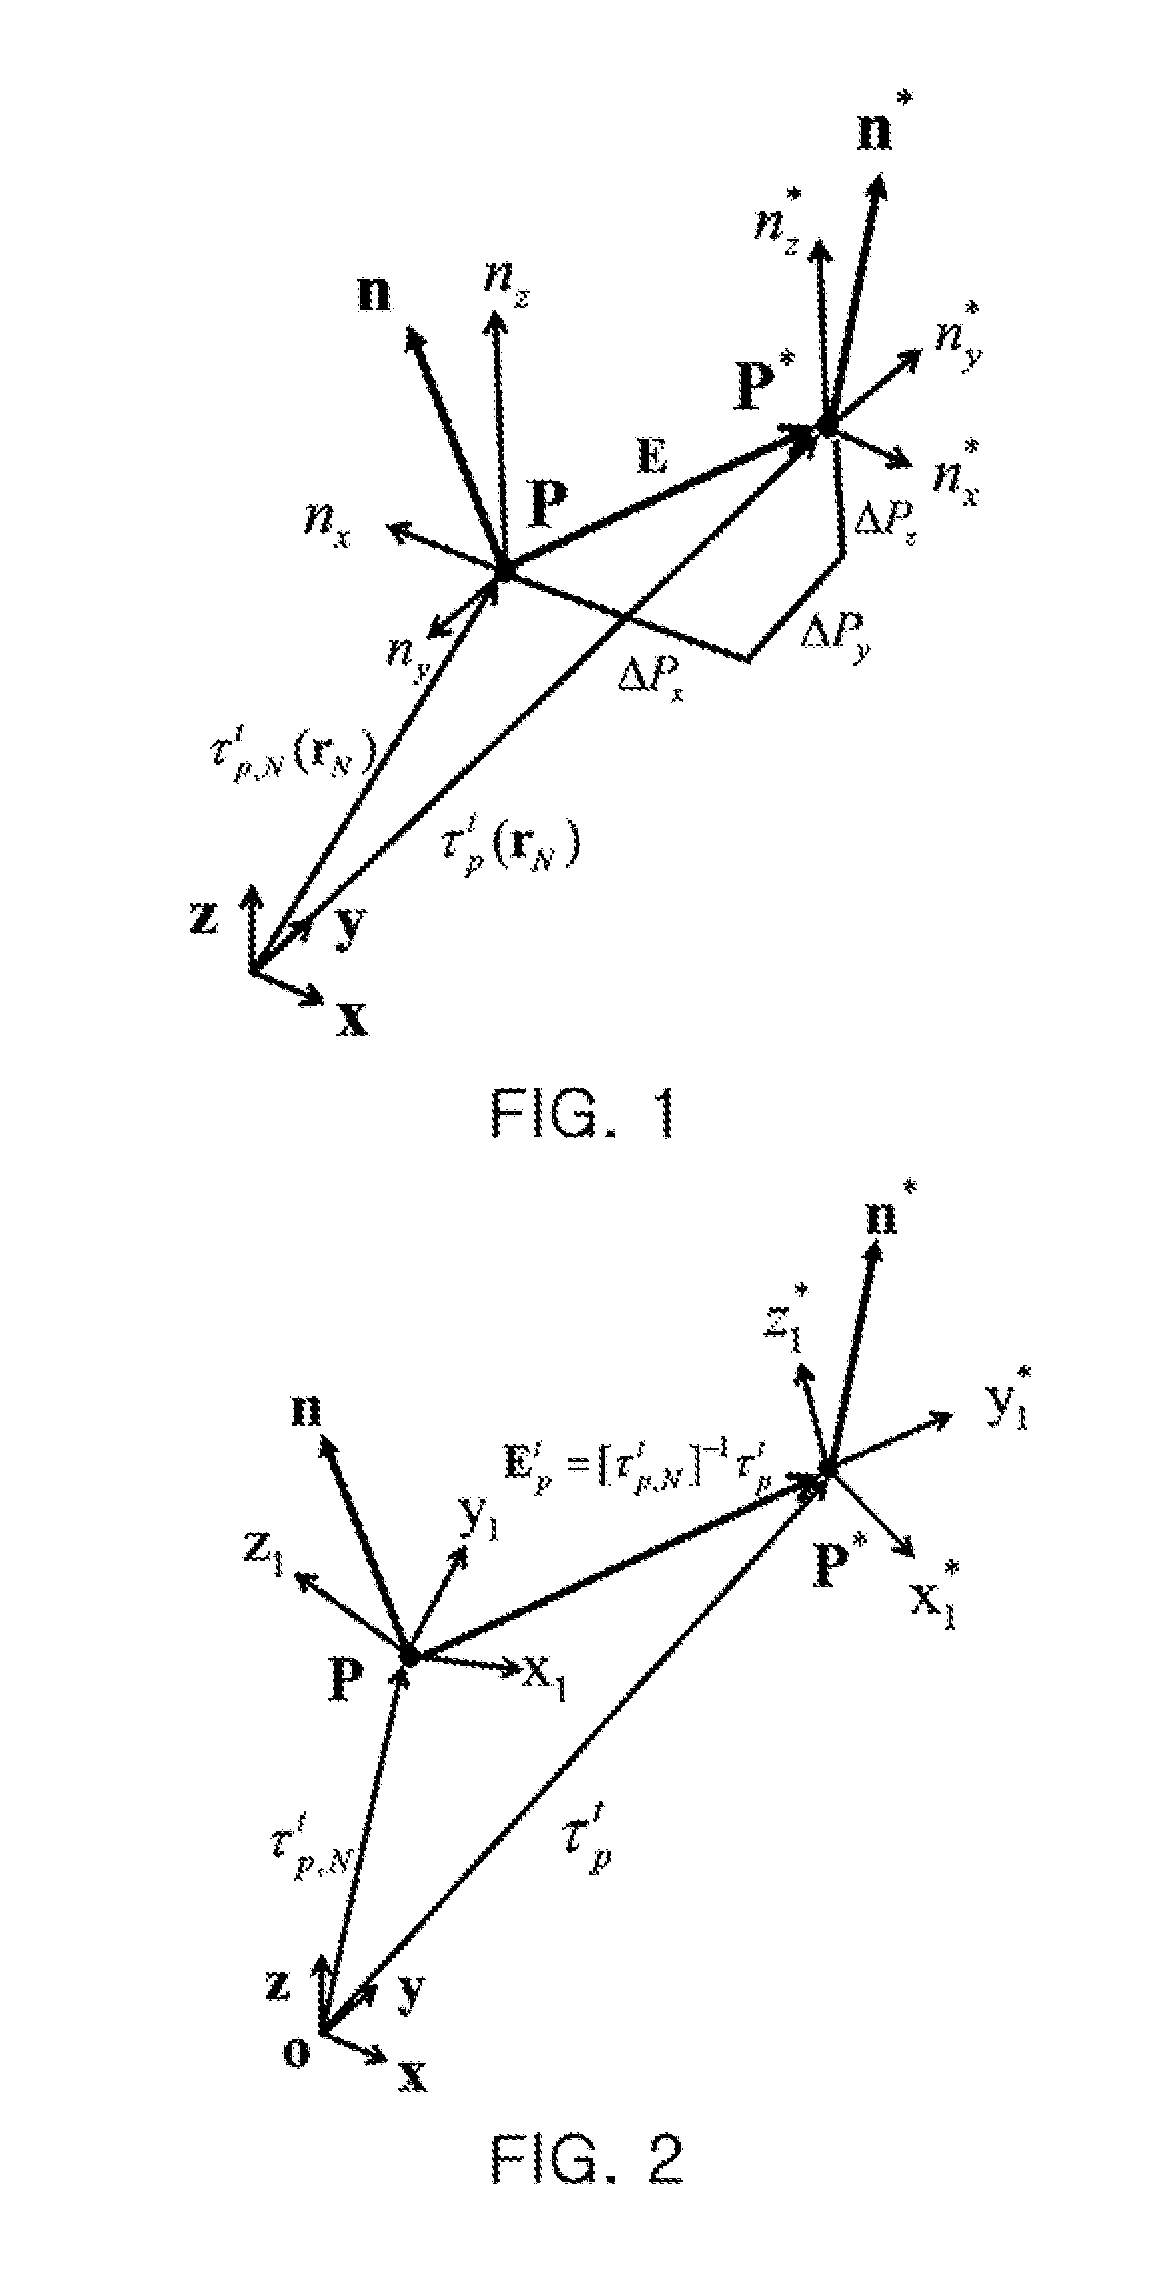 Error compensation method for multi-axis controlled machines